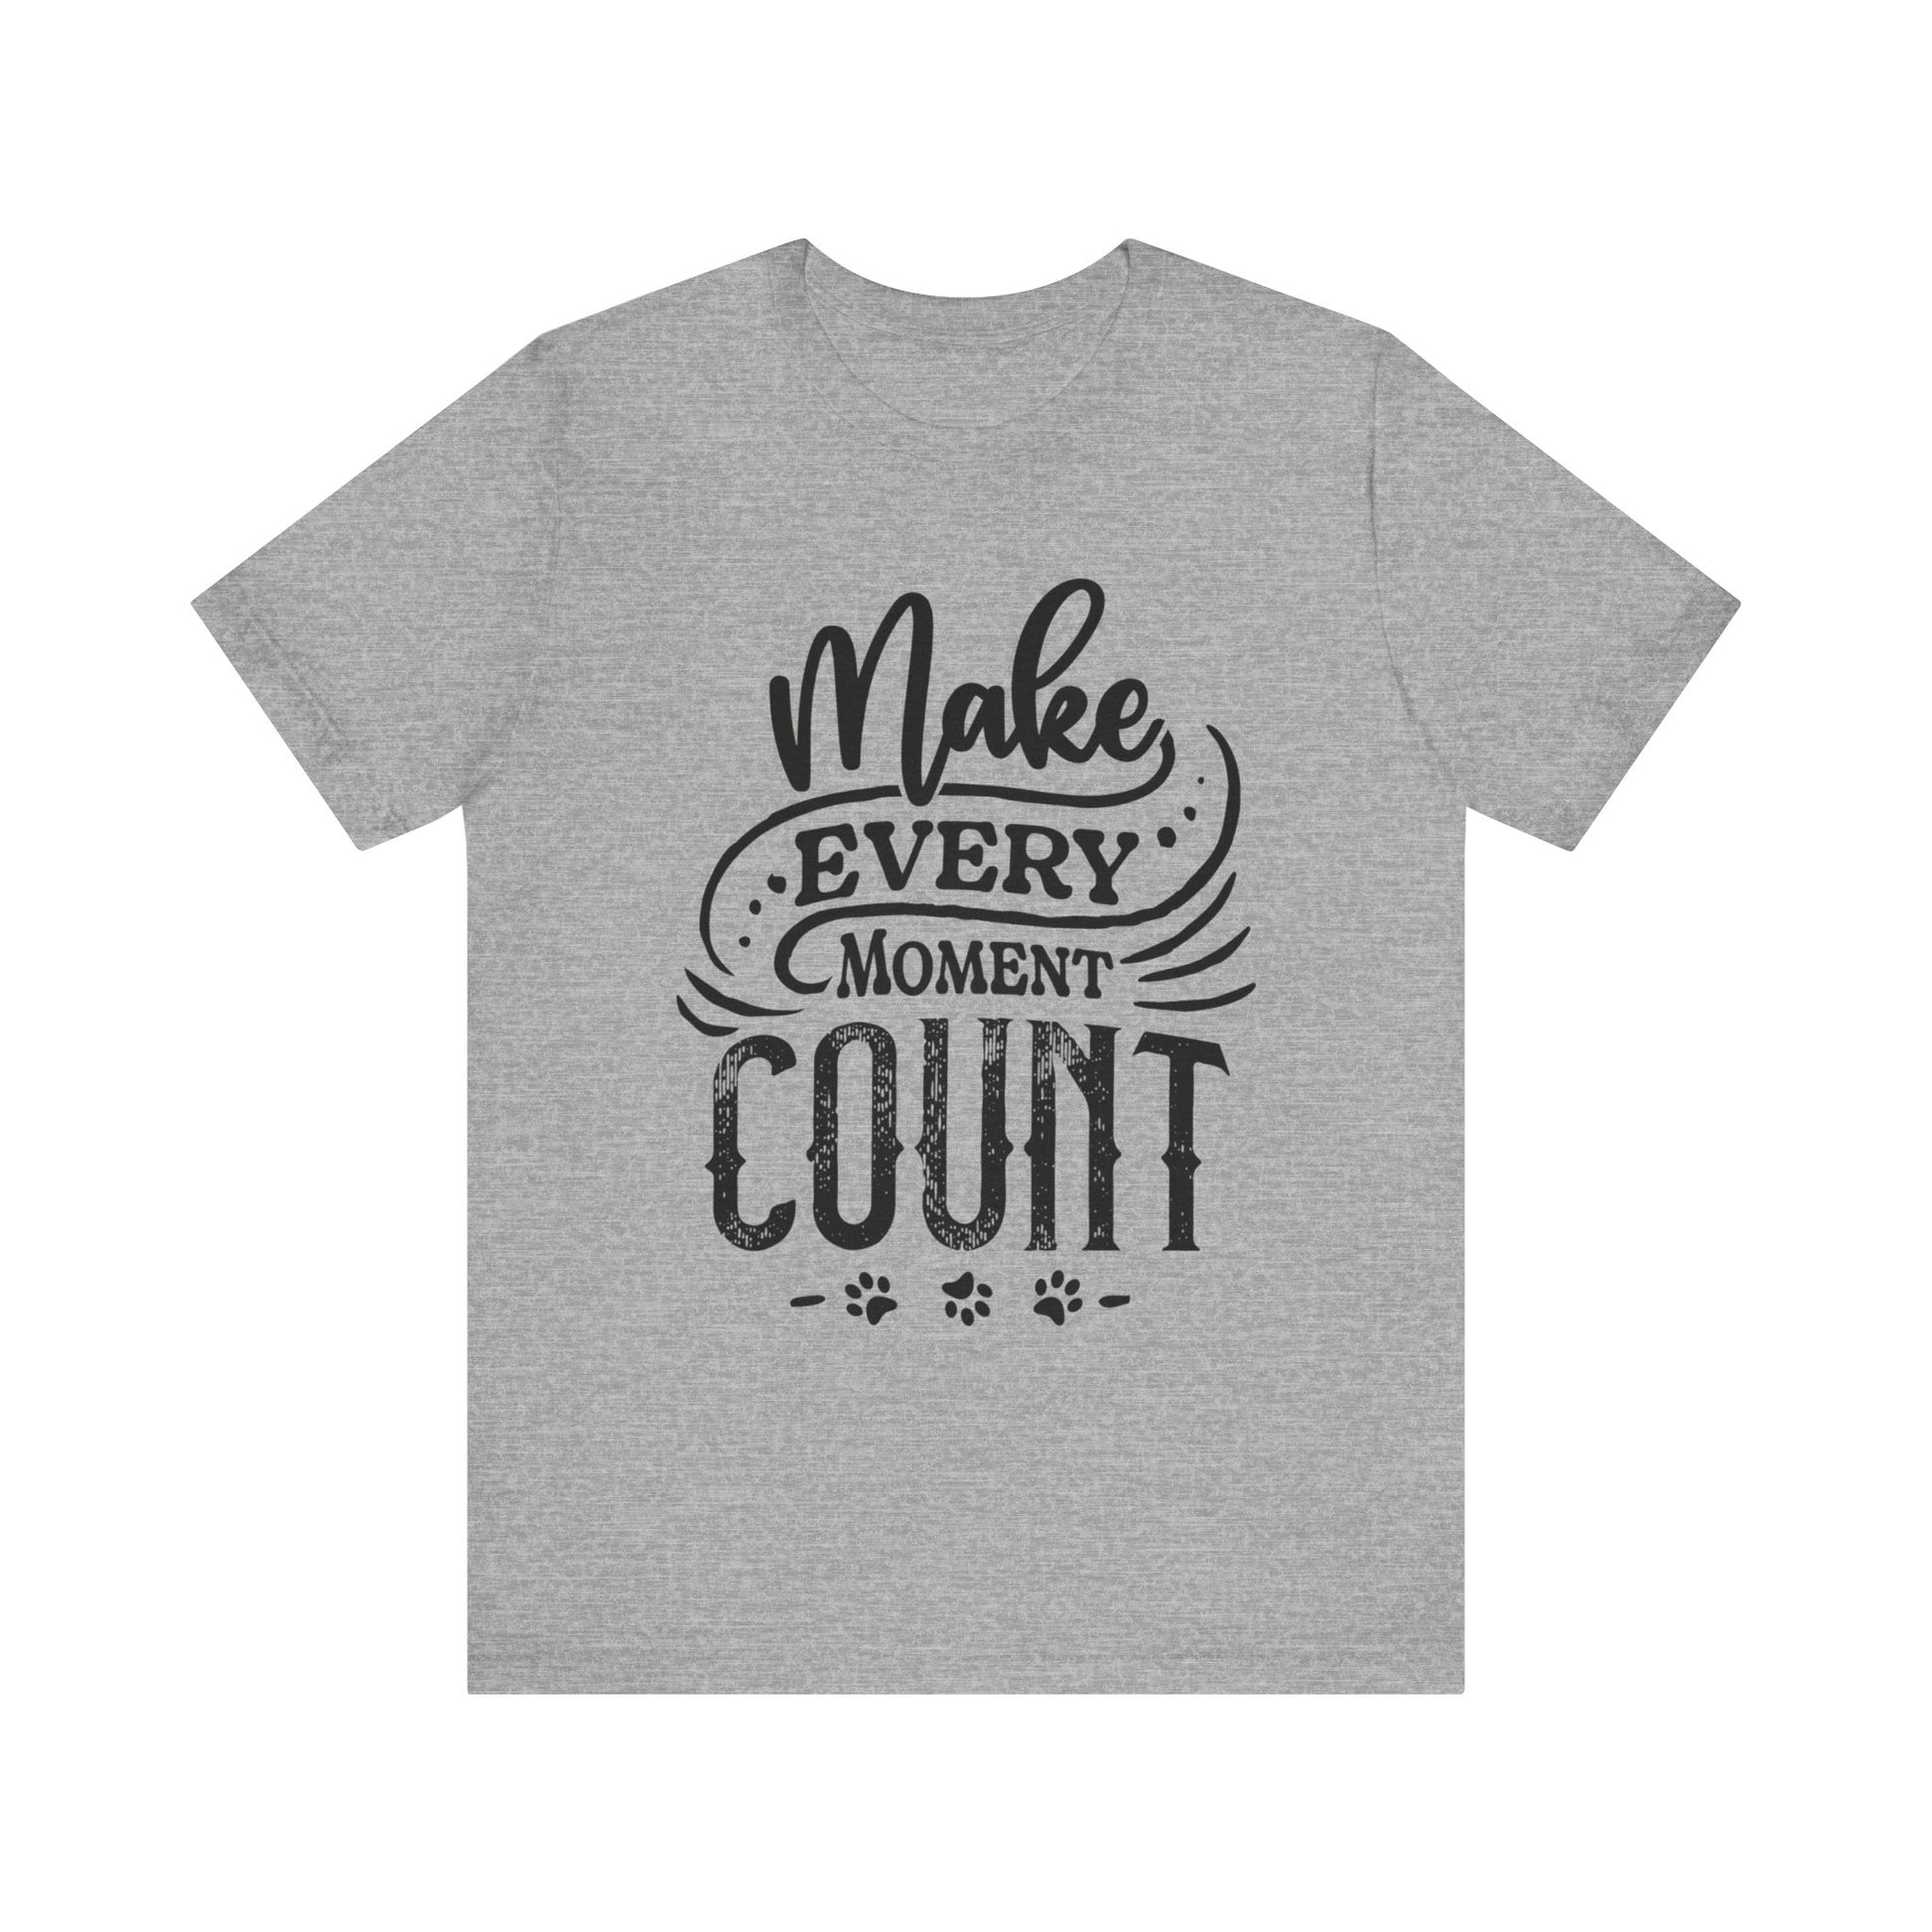 A heather grey Dogs Pure Love unisex tee, displays the slogan 'Make Every Moment Count,' against a white canvas.